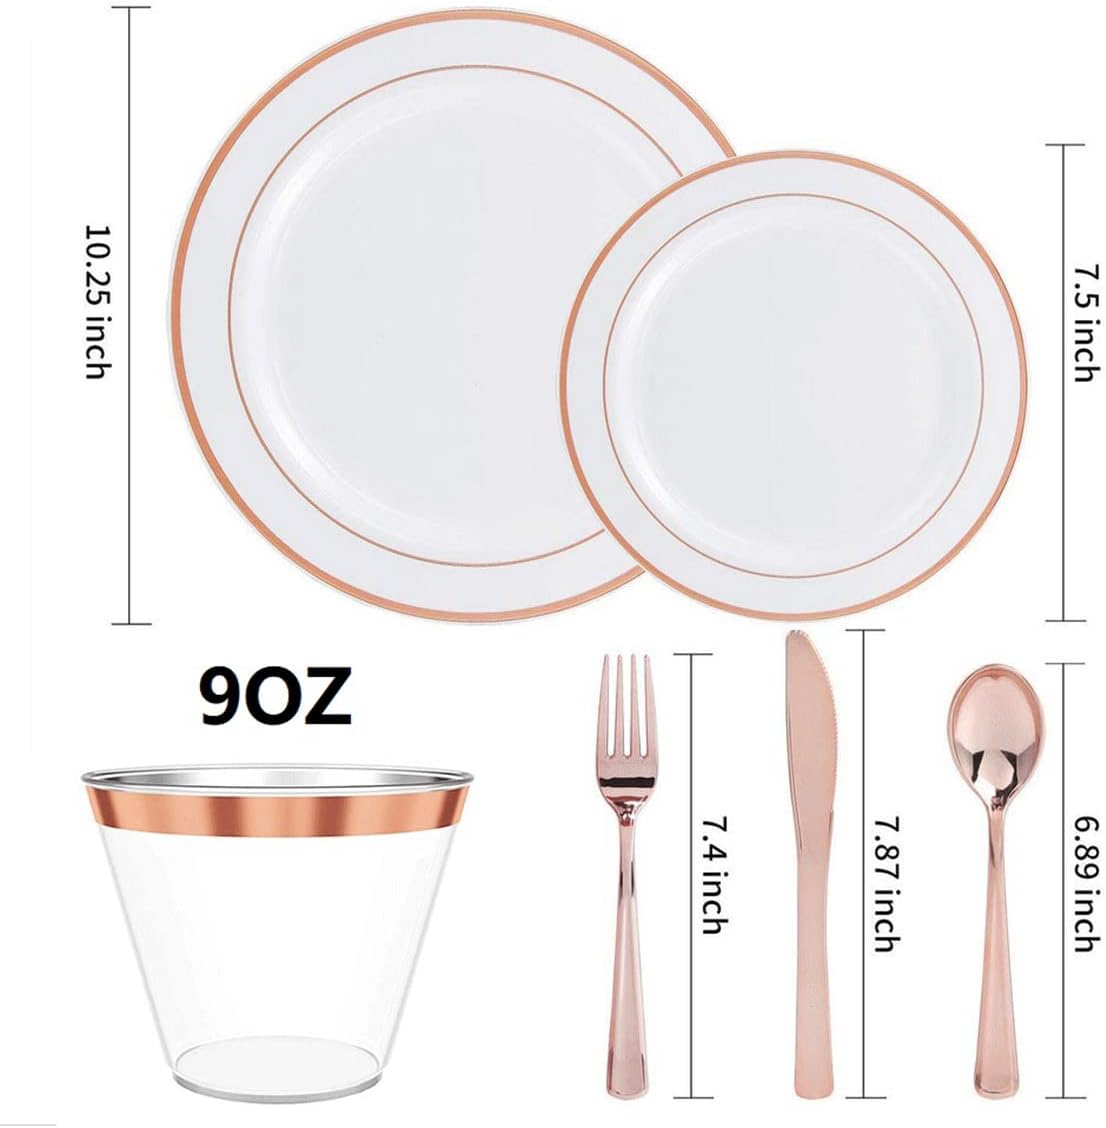 Beauenty 150Pcs Rose Gold Party Supplies Party Tableware Party Disposable Plastic Cutlery Set, Party Supplies Plate, Spoon,cup,Cutlery-25 Guests